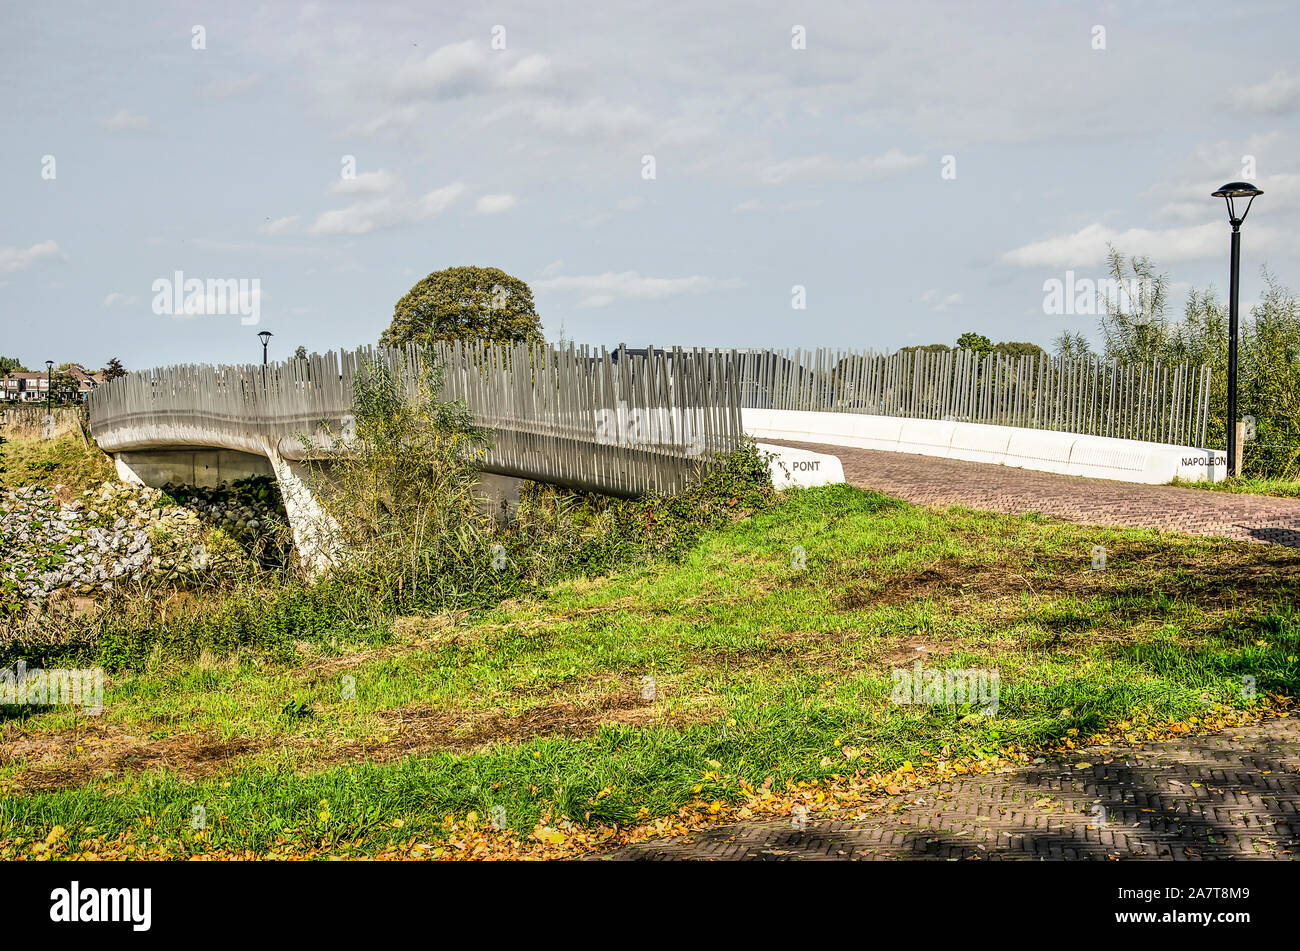 Vianen, the Netherlands, October 13, 2019: concrete bridge Pont Napoleon, constructed in 2016, crossing the new side channel to the main channel of th Stock Photo